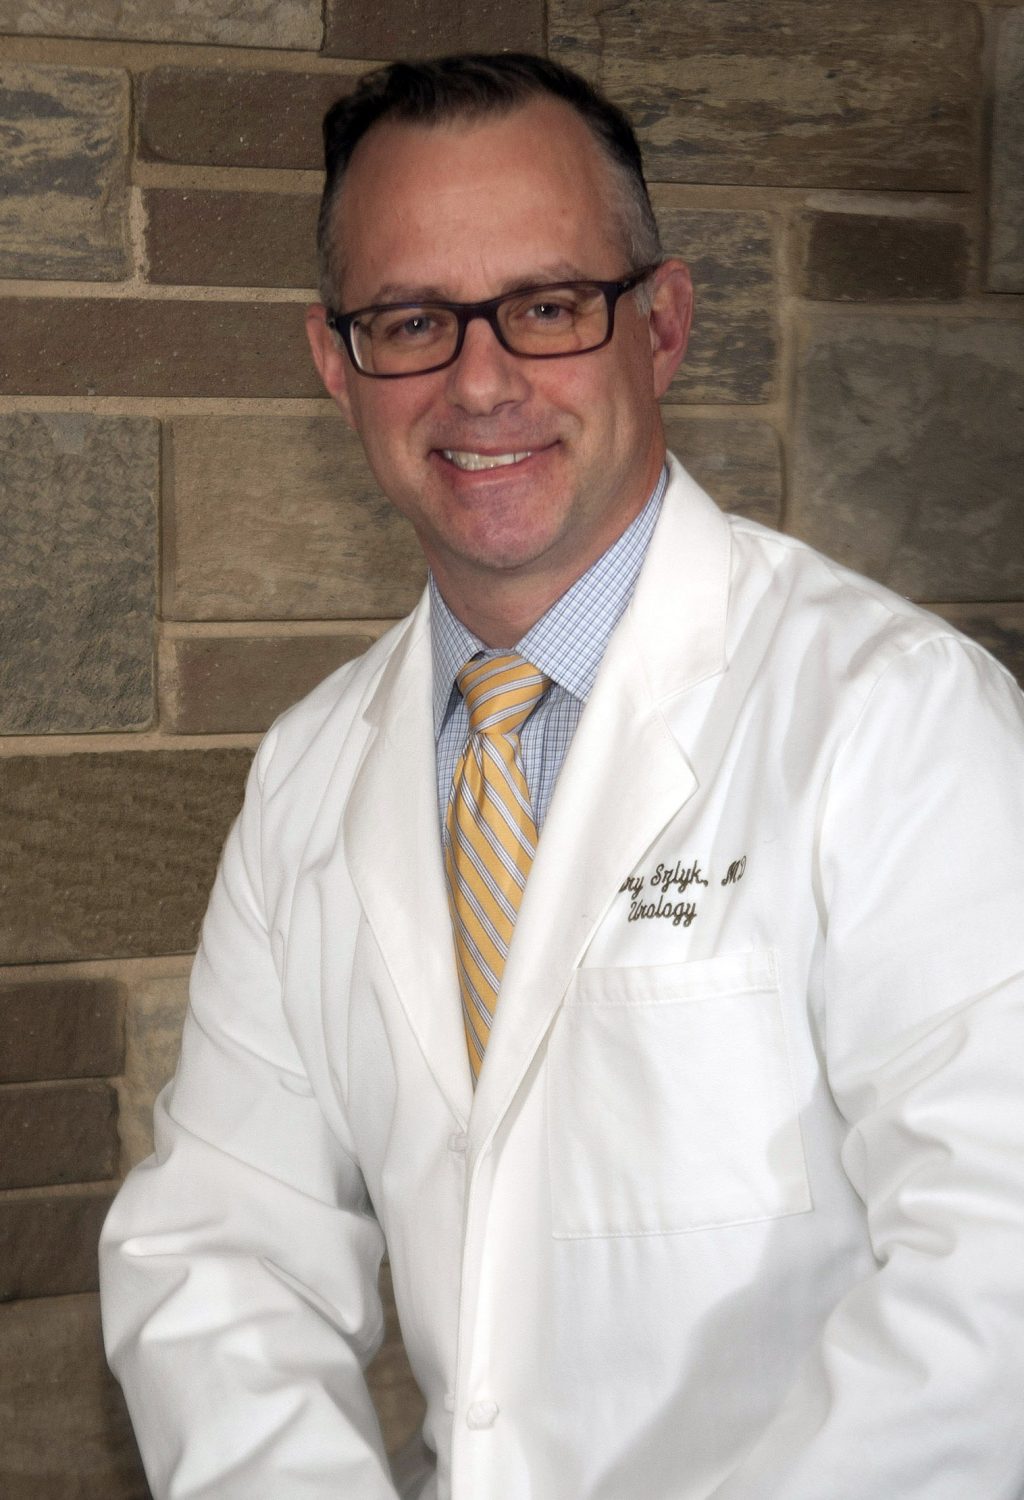 Dr Gregory Szlyk, MD FACS